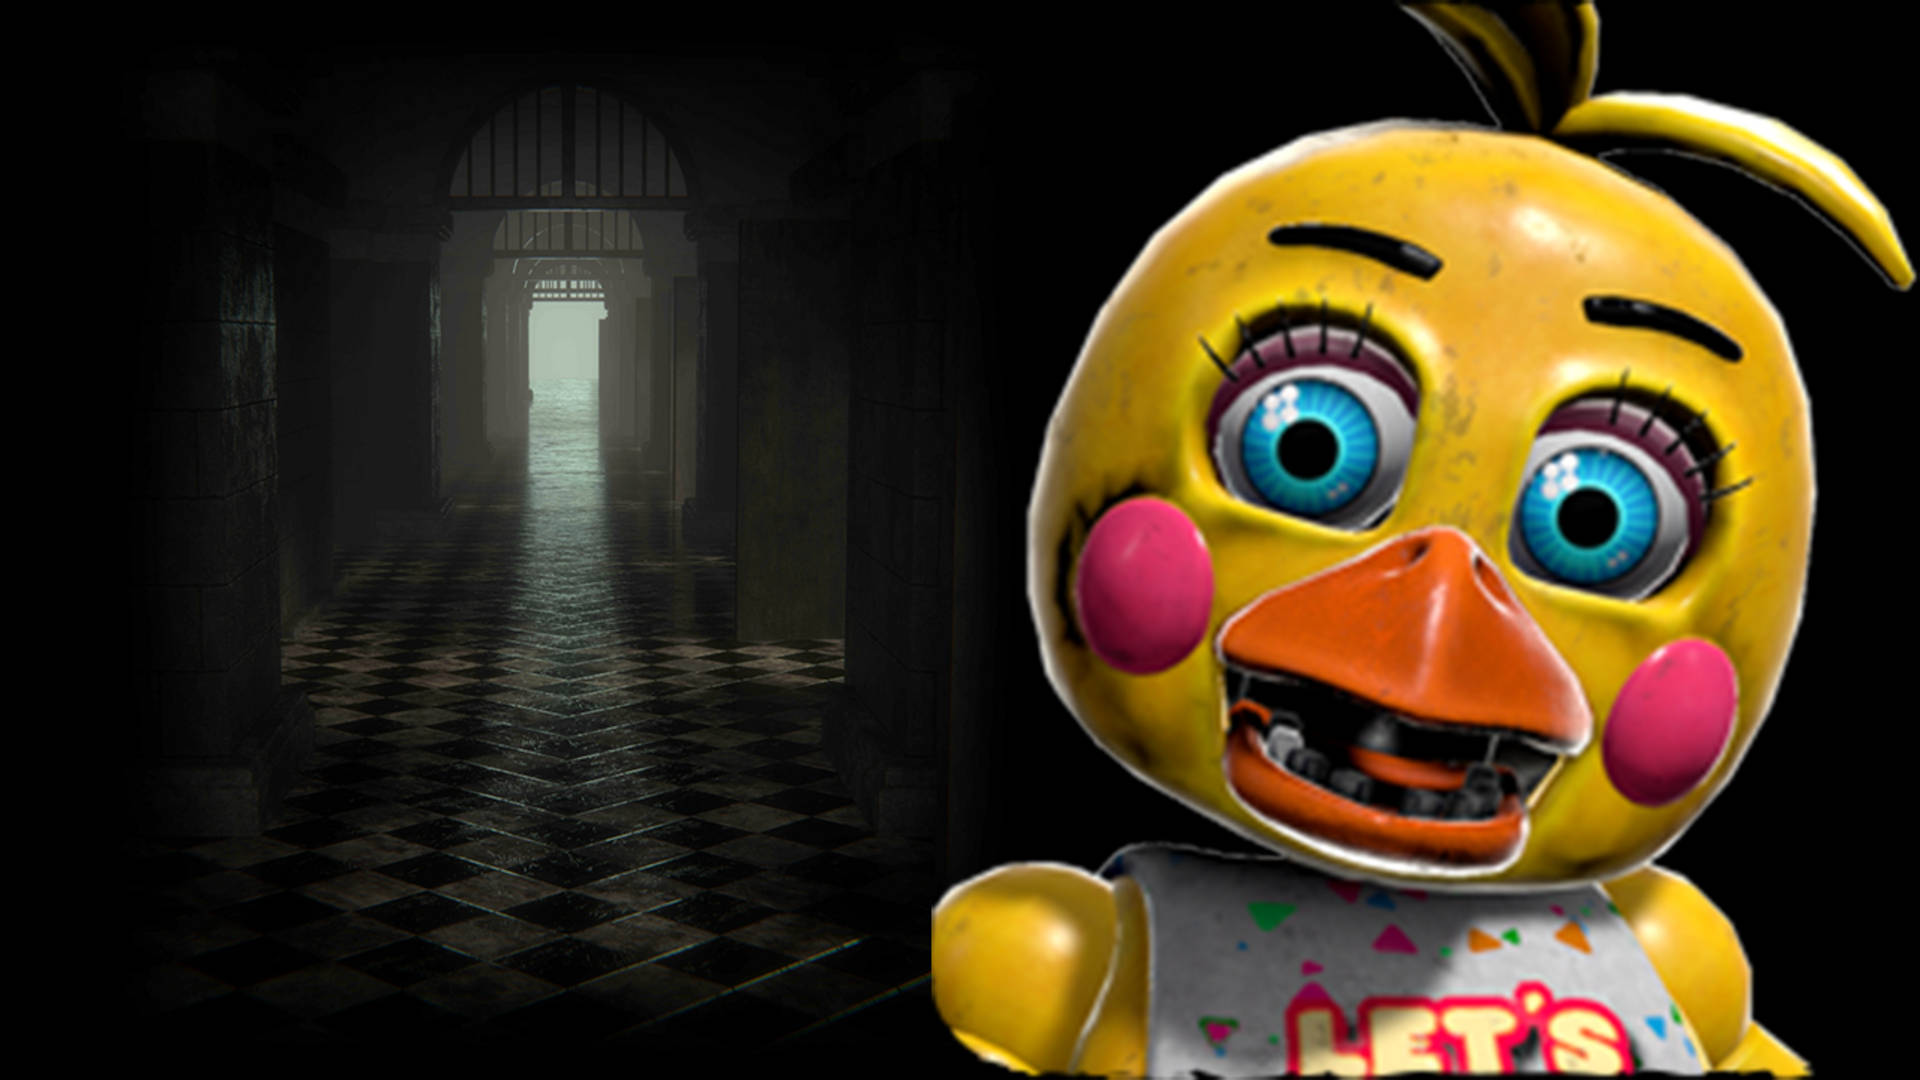 Intriguing Scene Of Toy Chica Navigating Through A Dark Hallway In Fnaf. Shrouded In Mystery With Stunning Details.